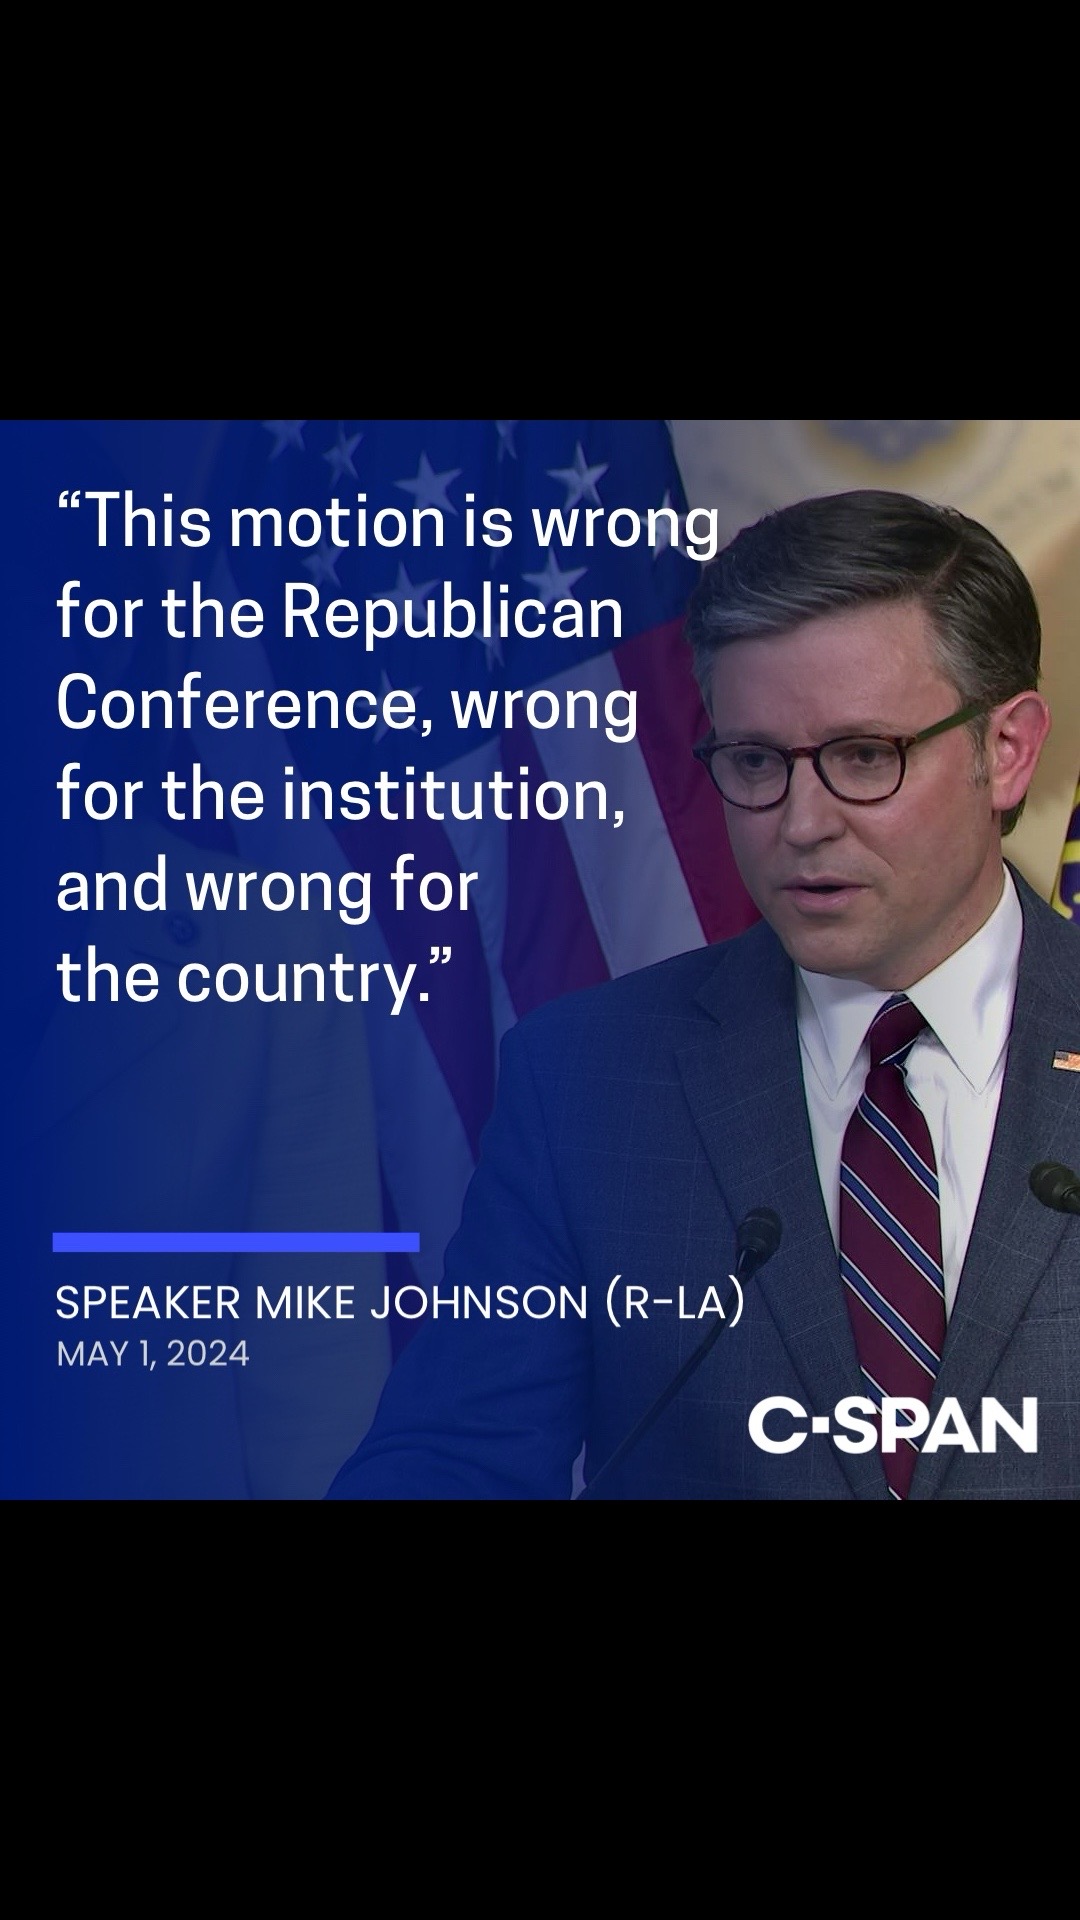 Speaker Mike Johnson (R-LA) on Wednesday called Rep. Marjorie Taylor Greene’s (R-GA) motion to oust him “wrong for the country.”   “This motion is wrong for the Republican Conference, wrong for the institution, and wrong for the country,” he said in a statement after the Georgia Republican pledged to force a vote next week to strip him of his gavel.   Hardline Republicans have grown increasingly frustrated with Speaker Johnson, pointing to him frequently turning to Democrats for their support in passing key legislation like Ukraine aid, government funding and FISA warrantless surveillance.   “Mike Johnson is giving them everything they want,” Rep. Greene said. “I find it very satisfying that